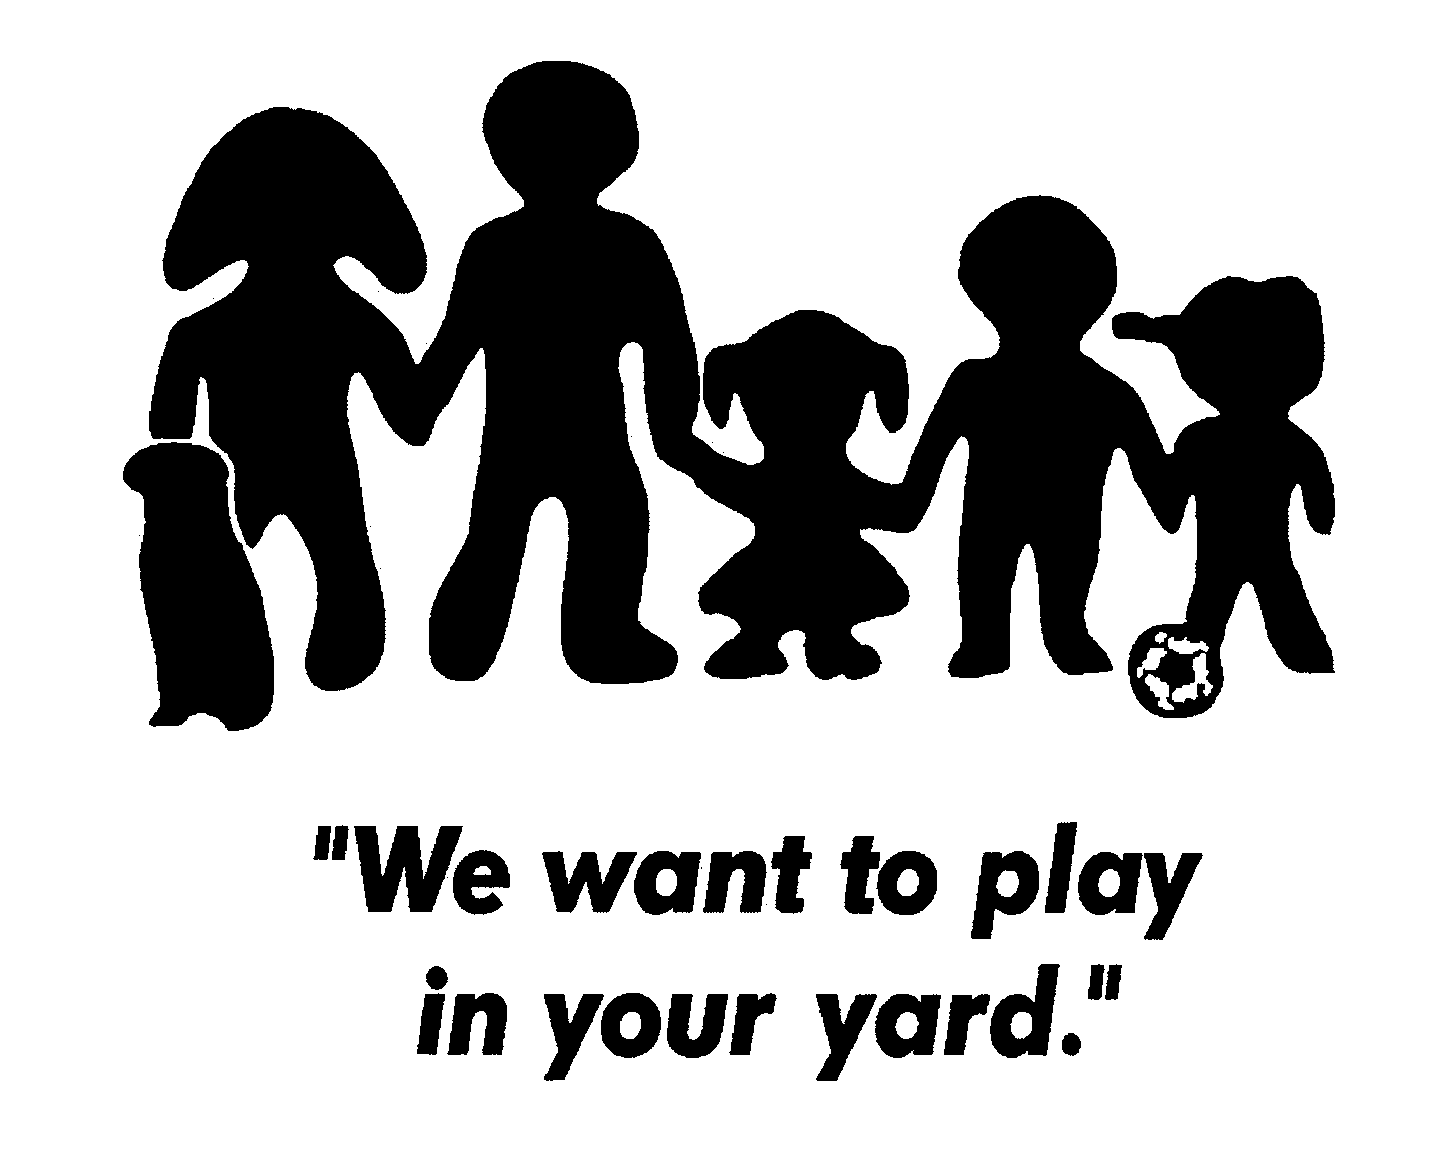  "WE WANT TO PLAY IN YOUR YARD."